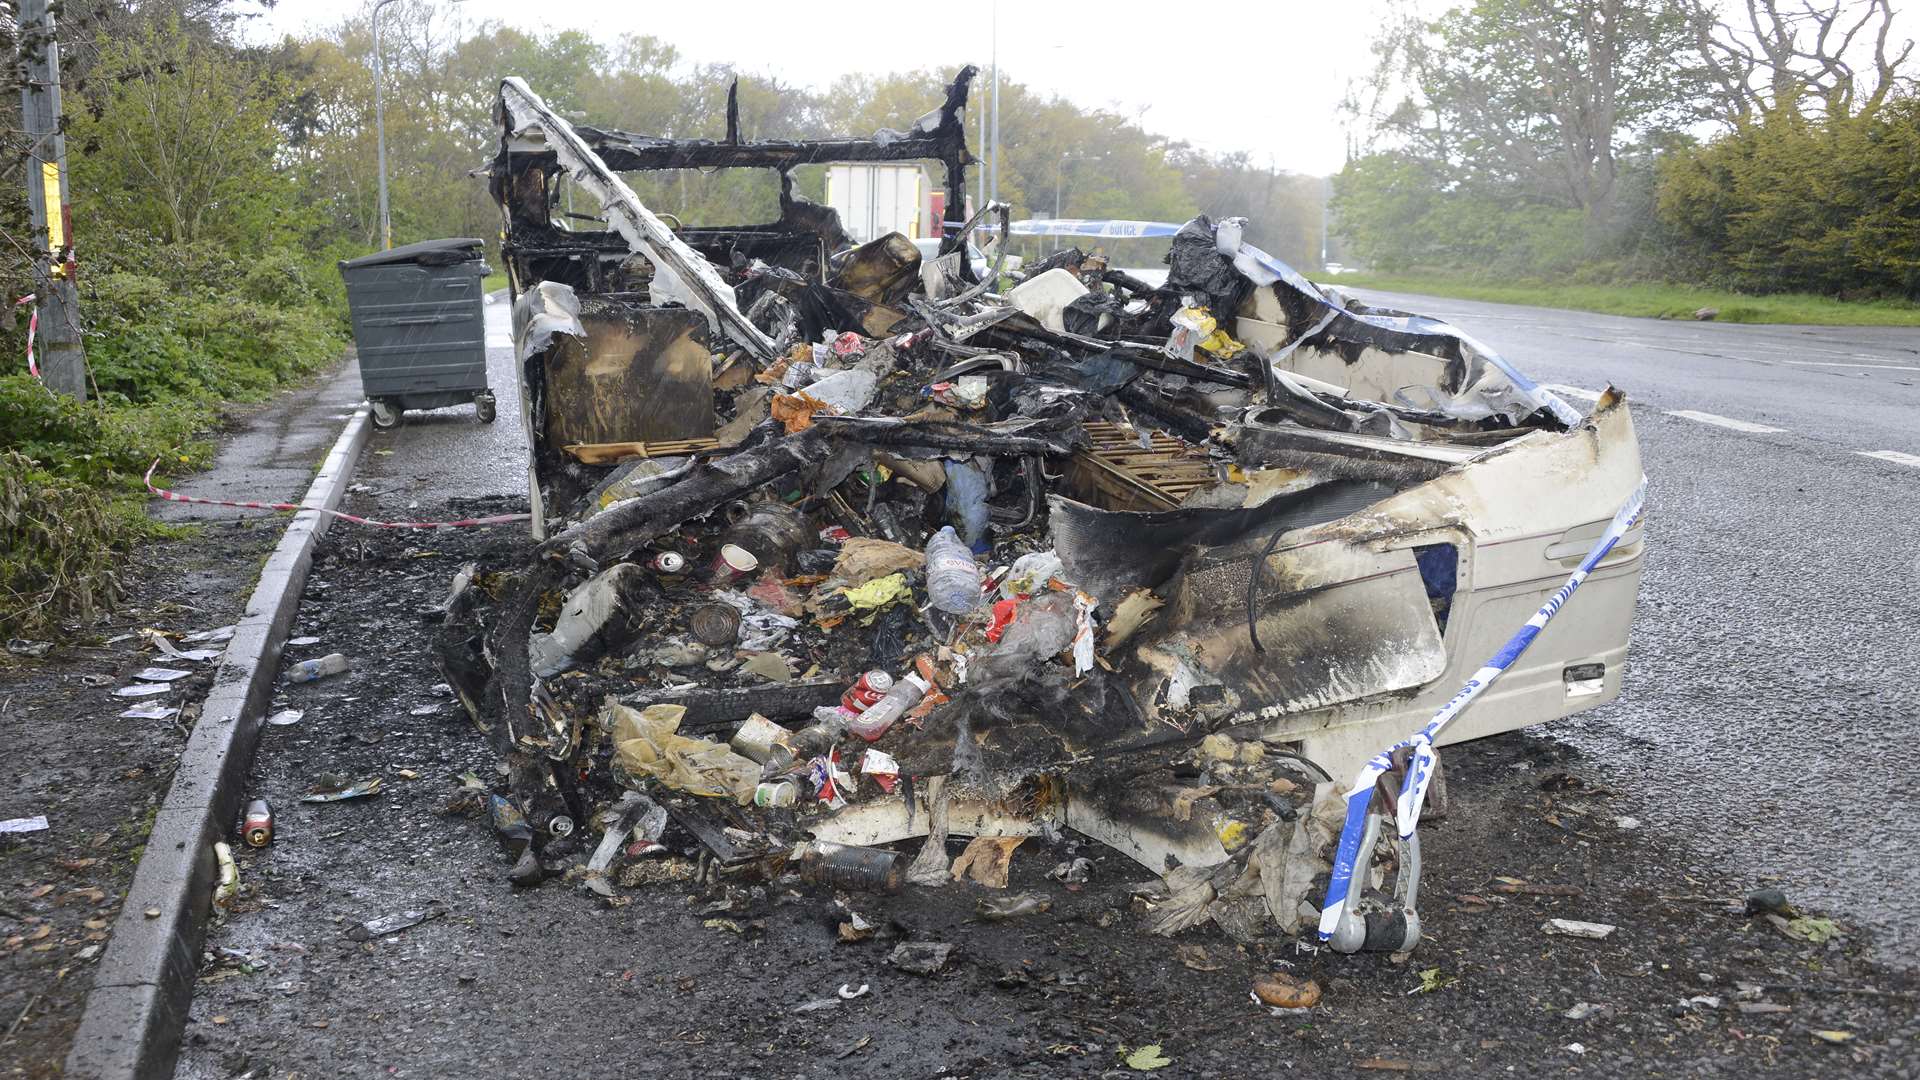 The remains of the caravan and its contents of rubbish after fire destroyed it in Hothfield.